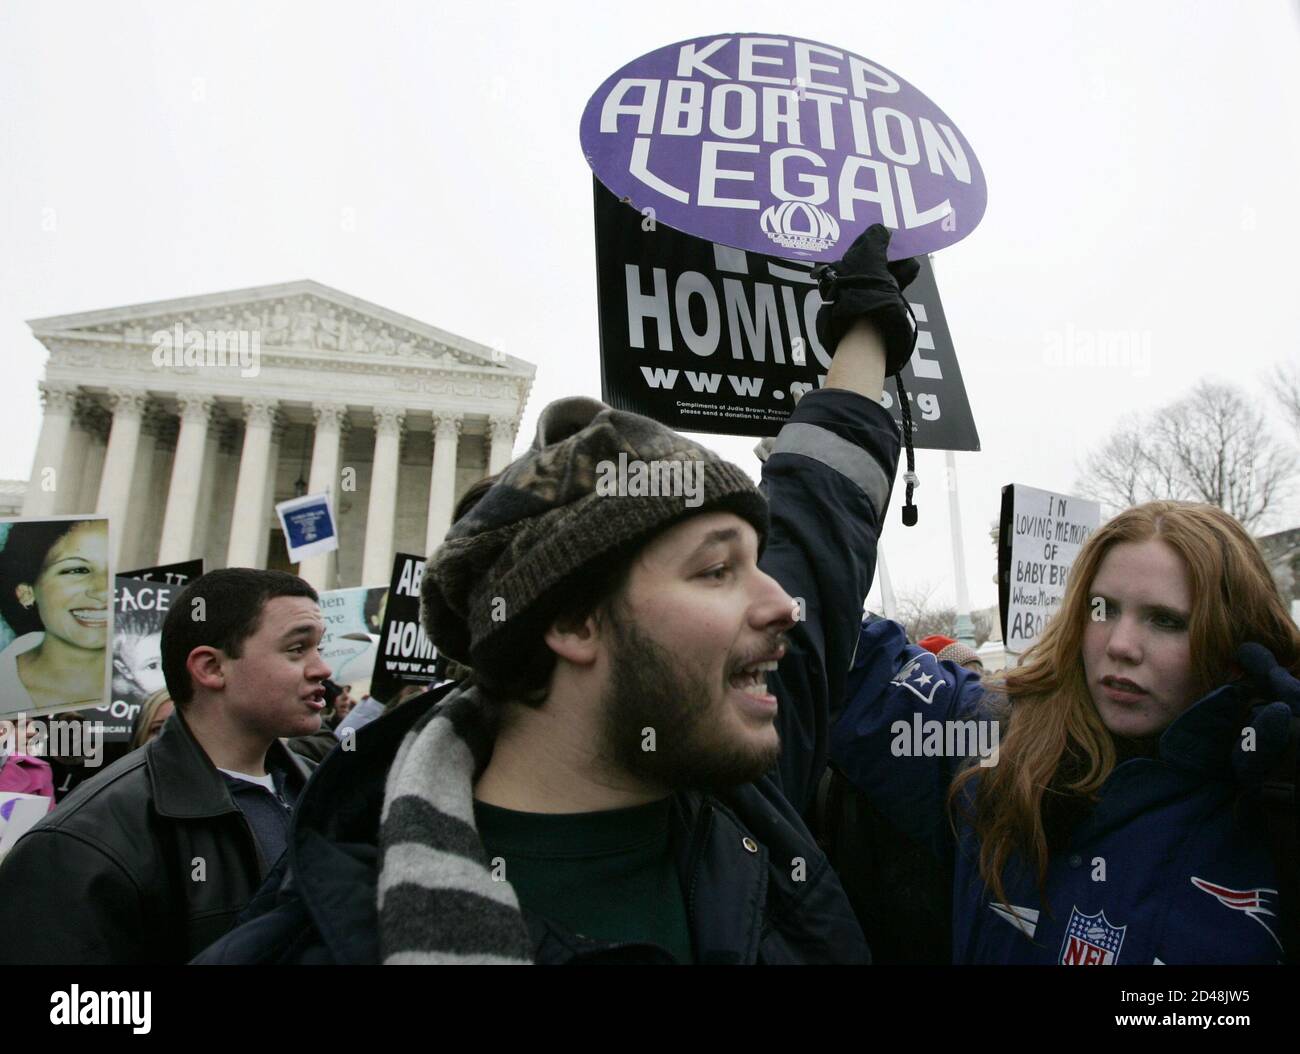 Pro-choice activist Luqman Clark (L), of Arlington, VA, argues with anti-abortion protestor Jessica Meunir, from Massachusetts, outside the U.S. Supreme Court in Washington January 24, 2005, during the 32nd annual March For Life protest against the Supreme Court's 1973 Roe v. Wade abortion rights decision. Thousands of pro-life activists marched to the Supreme Court where they were met by a handful of pro-choice campaigners. REUTERS/Jason Reed  REUTERS Stock Photo